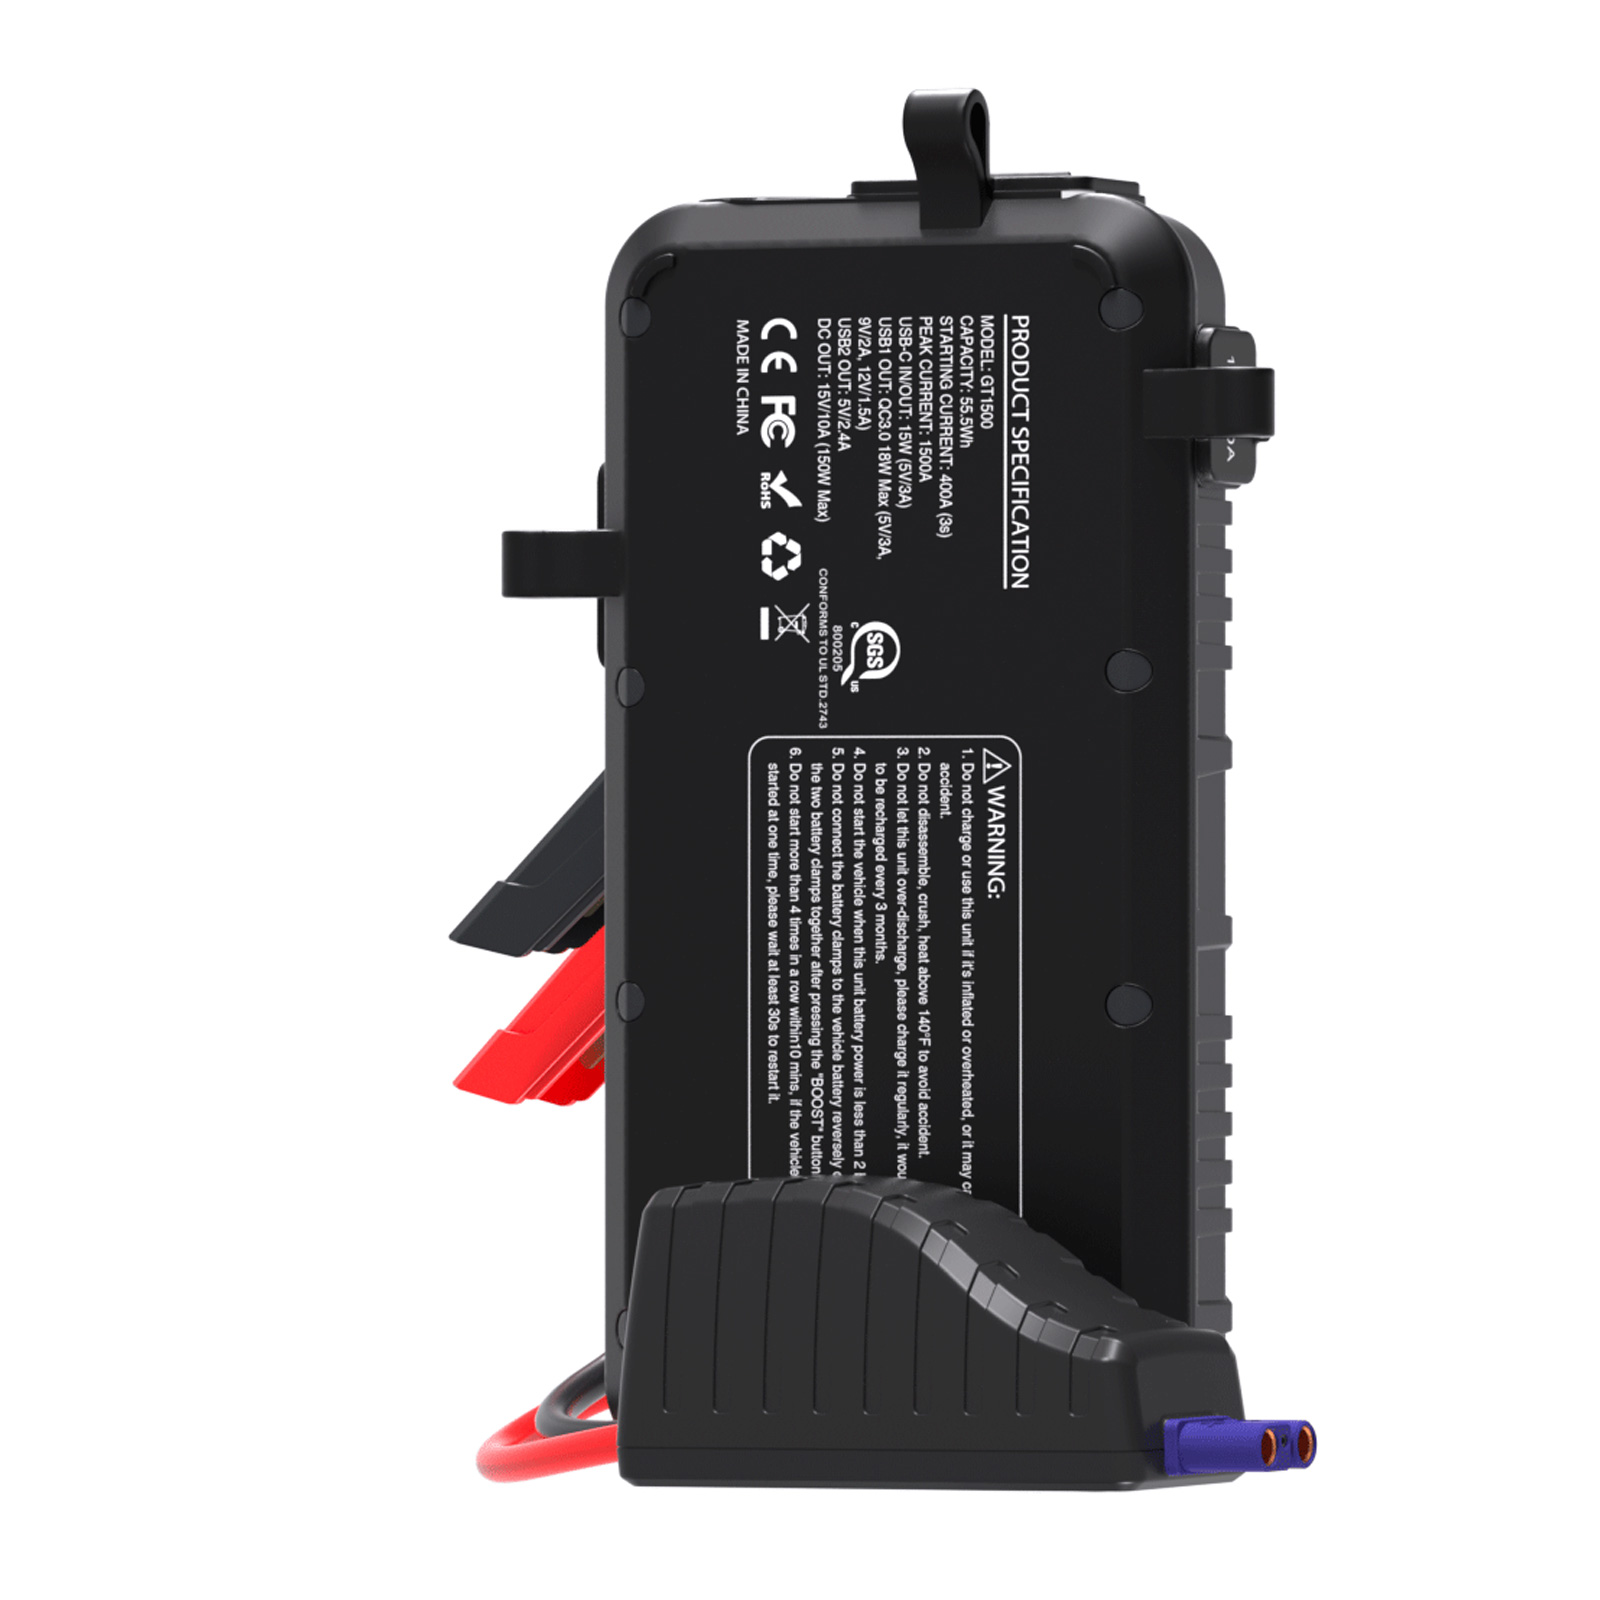 GOOLOO Jump Starter,3000A Peak 12V GP3000 Portable Car Battery Pack for Up  to 9.0L Gas and 7.0L Diesel Engines,Lithium Auto Car Starter Battery  Booster Box Power Bank 